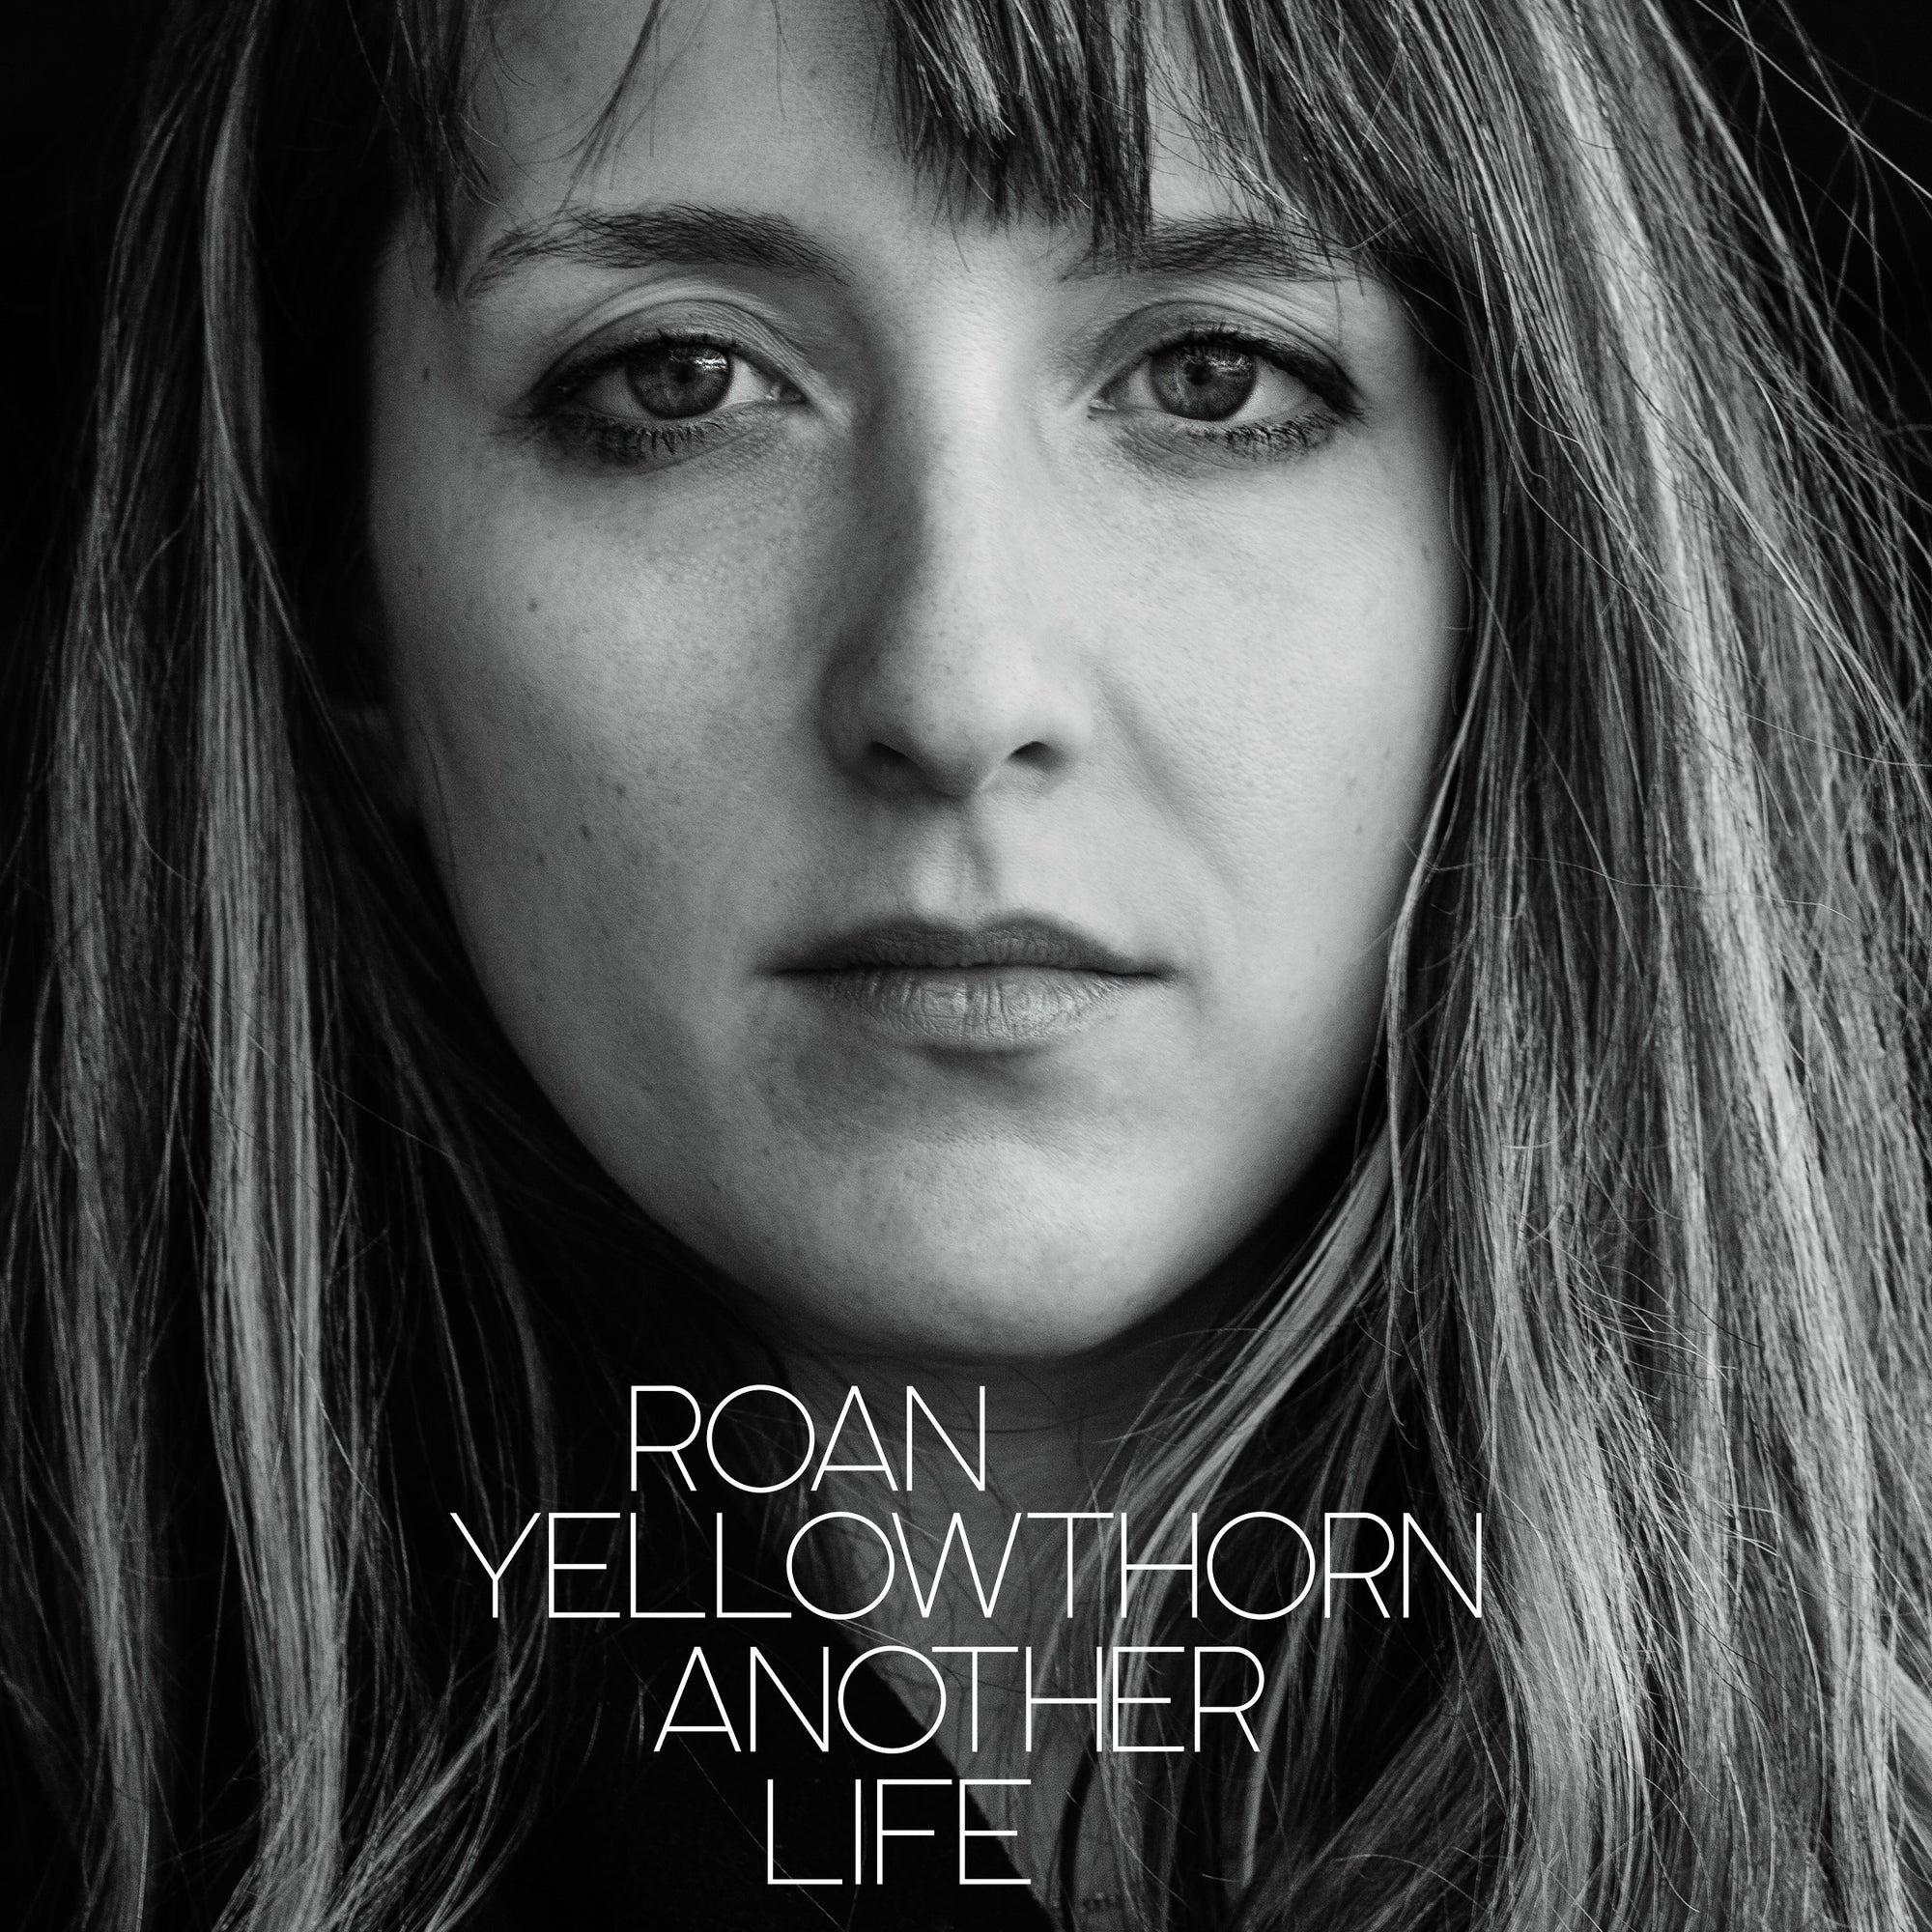 Pre-order Another Life, Roan Yellowthorn's New Album, Today